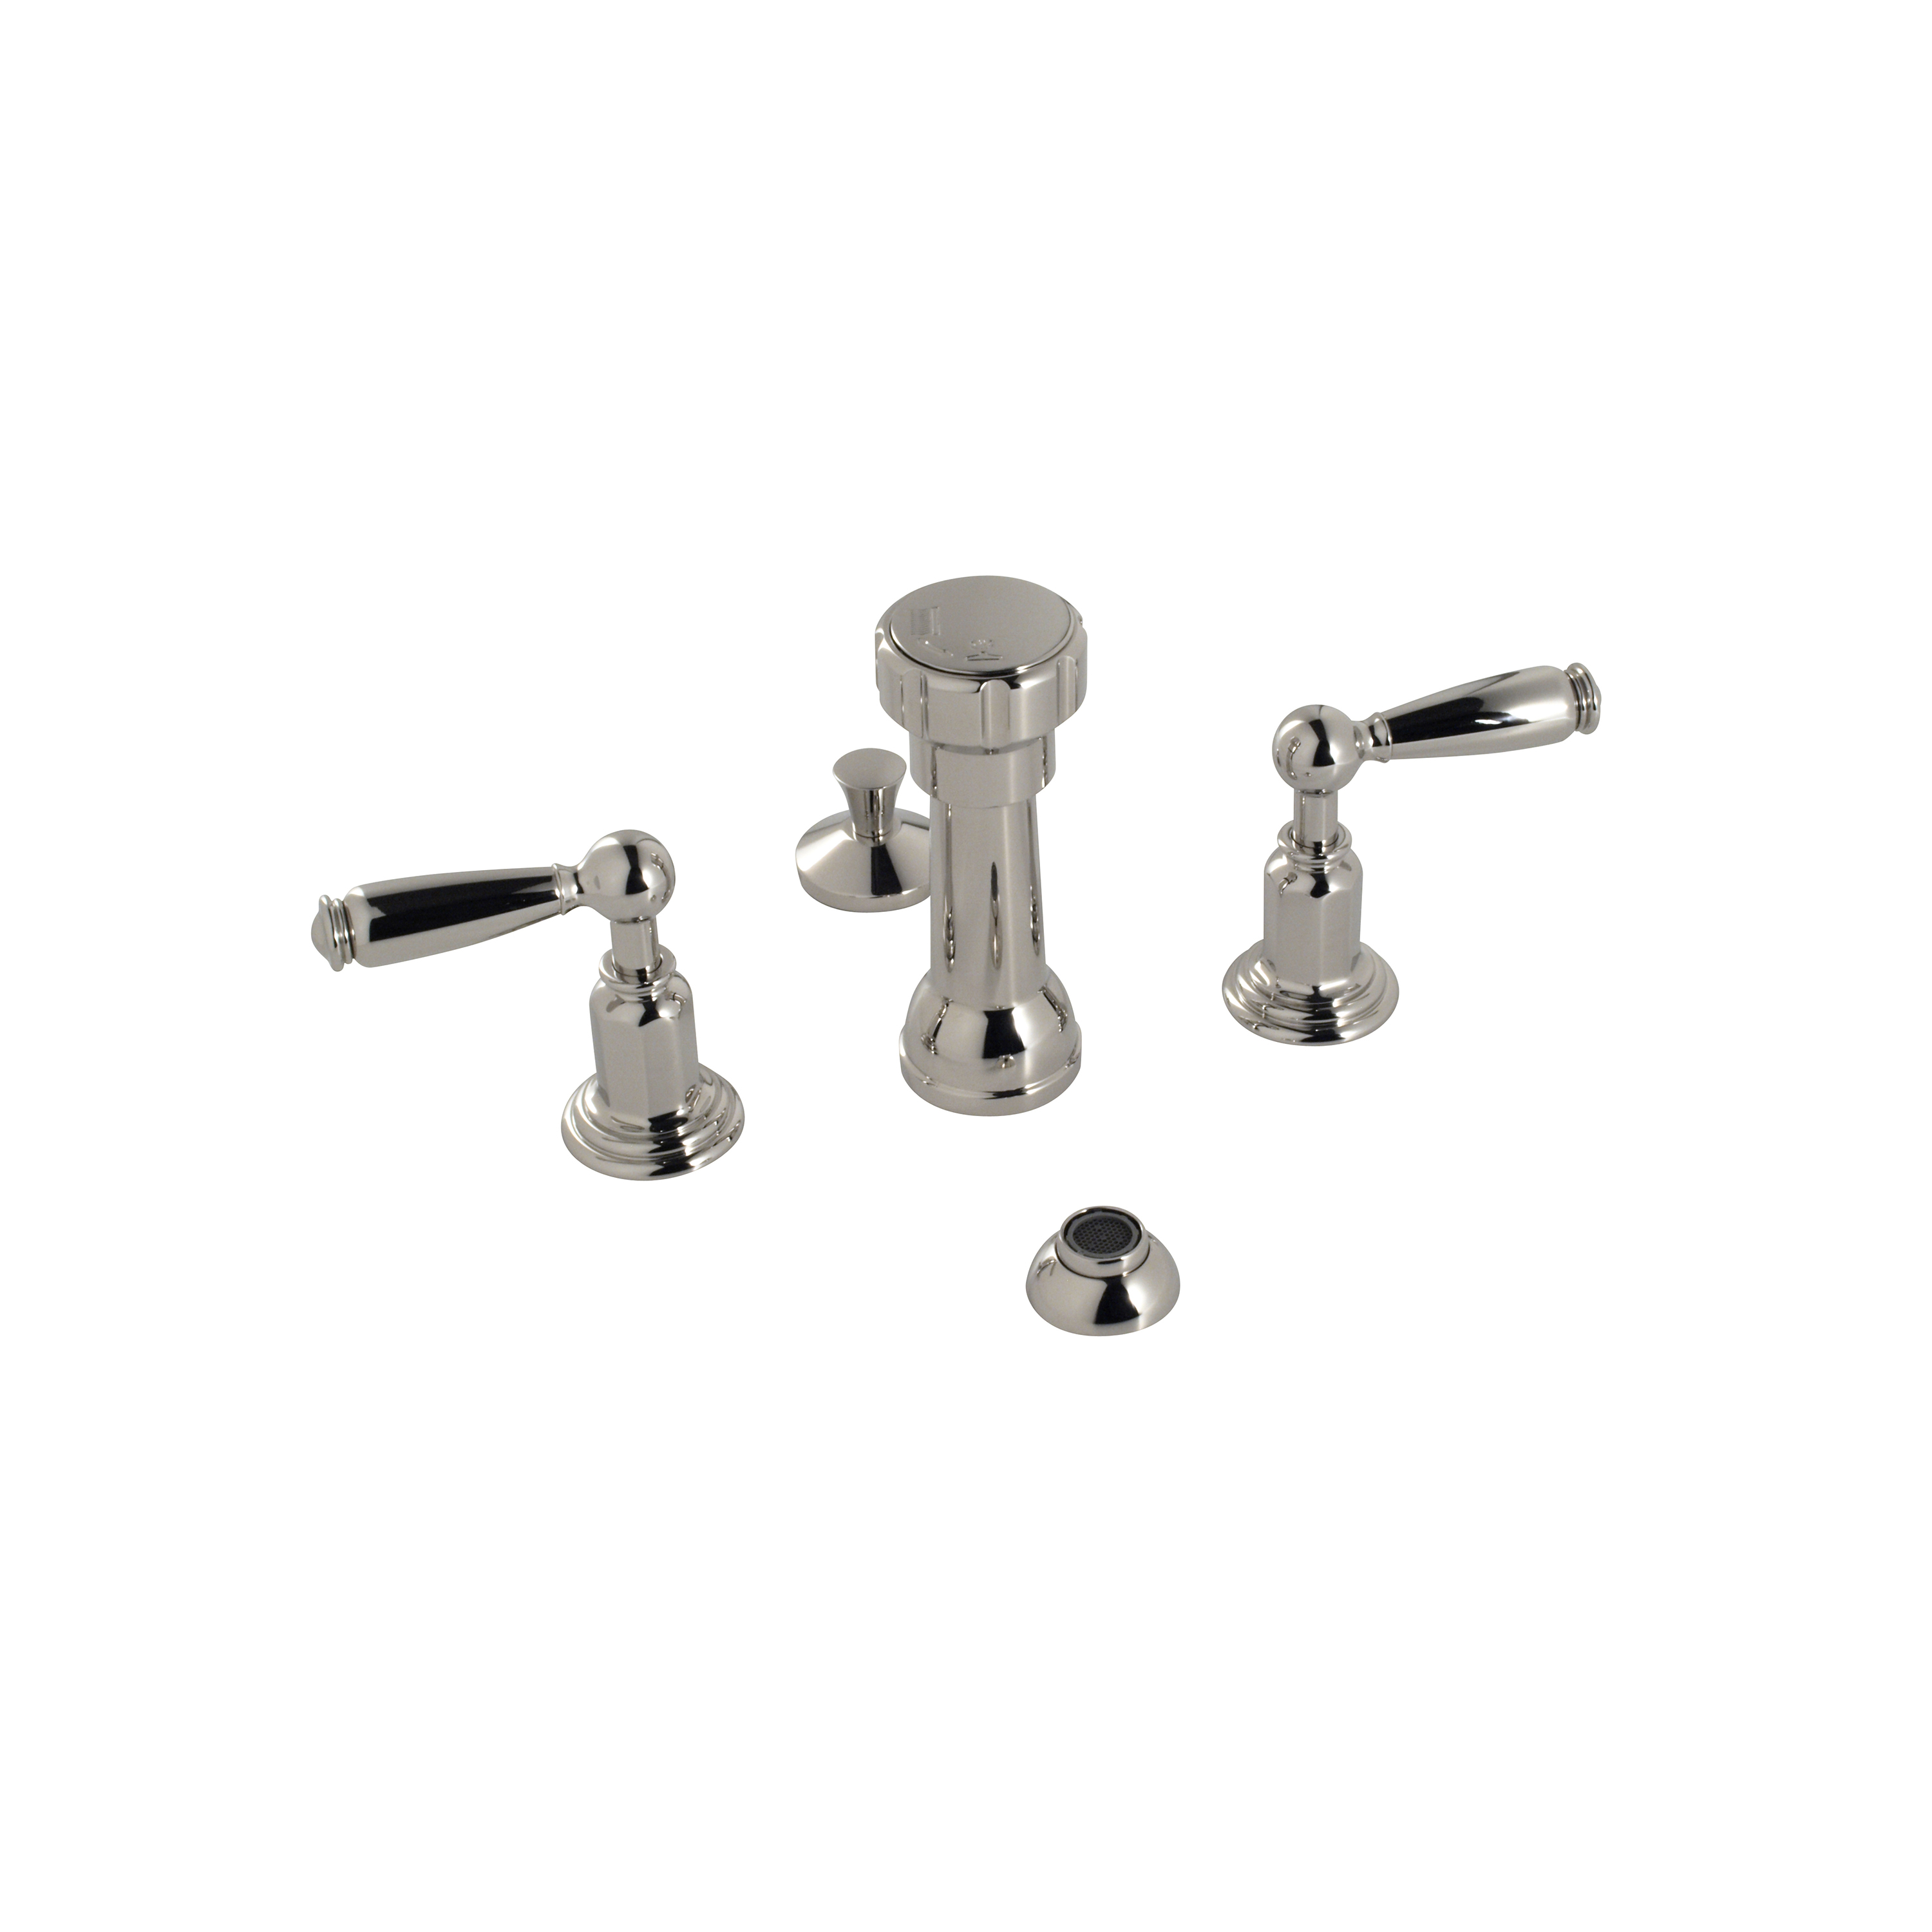 Santec 2970EY10 Vantage Bidet Fitting with EY Handles - Polished Chrome - Click Image to Close